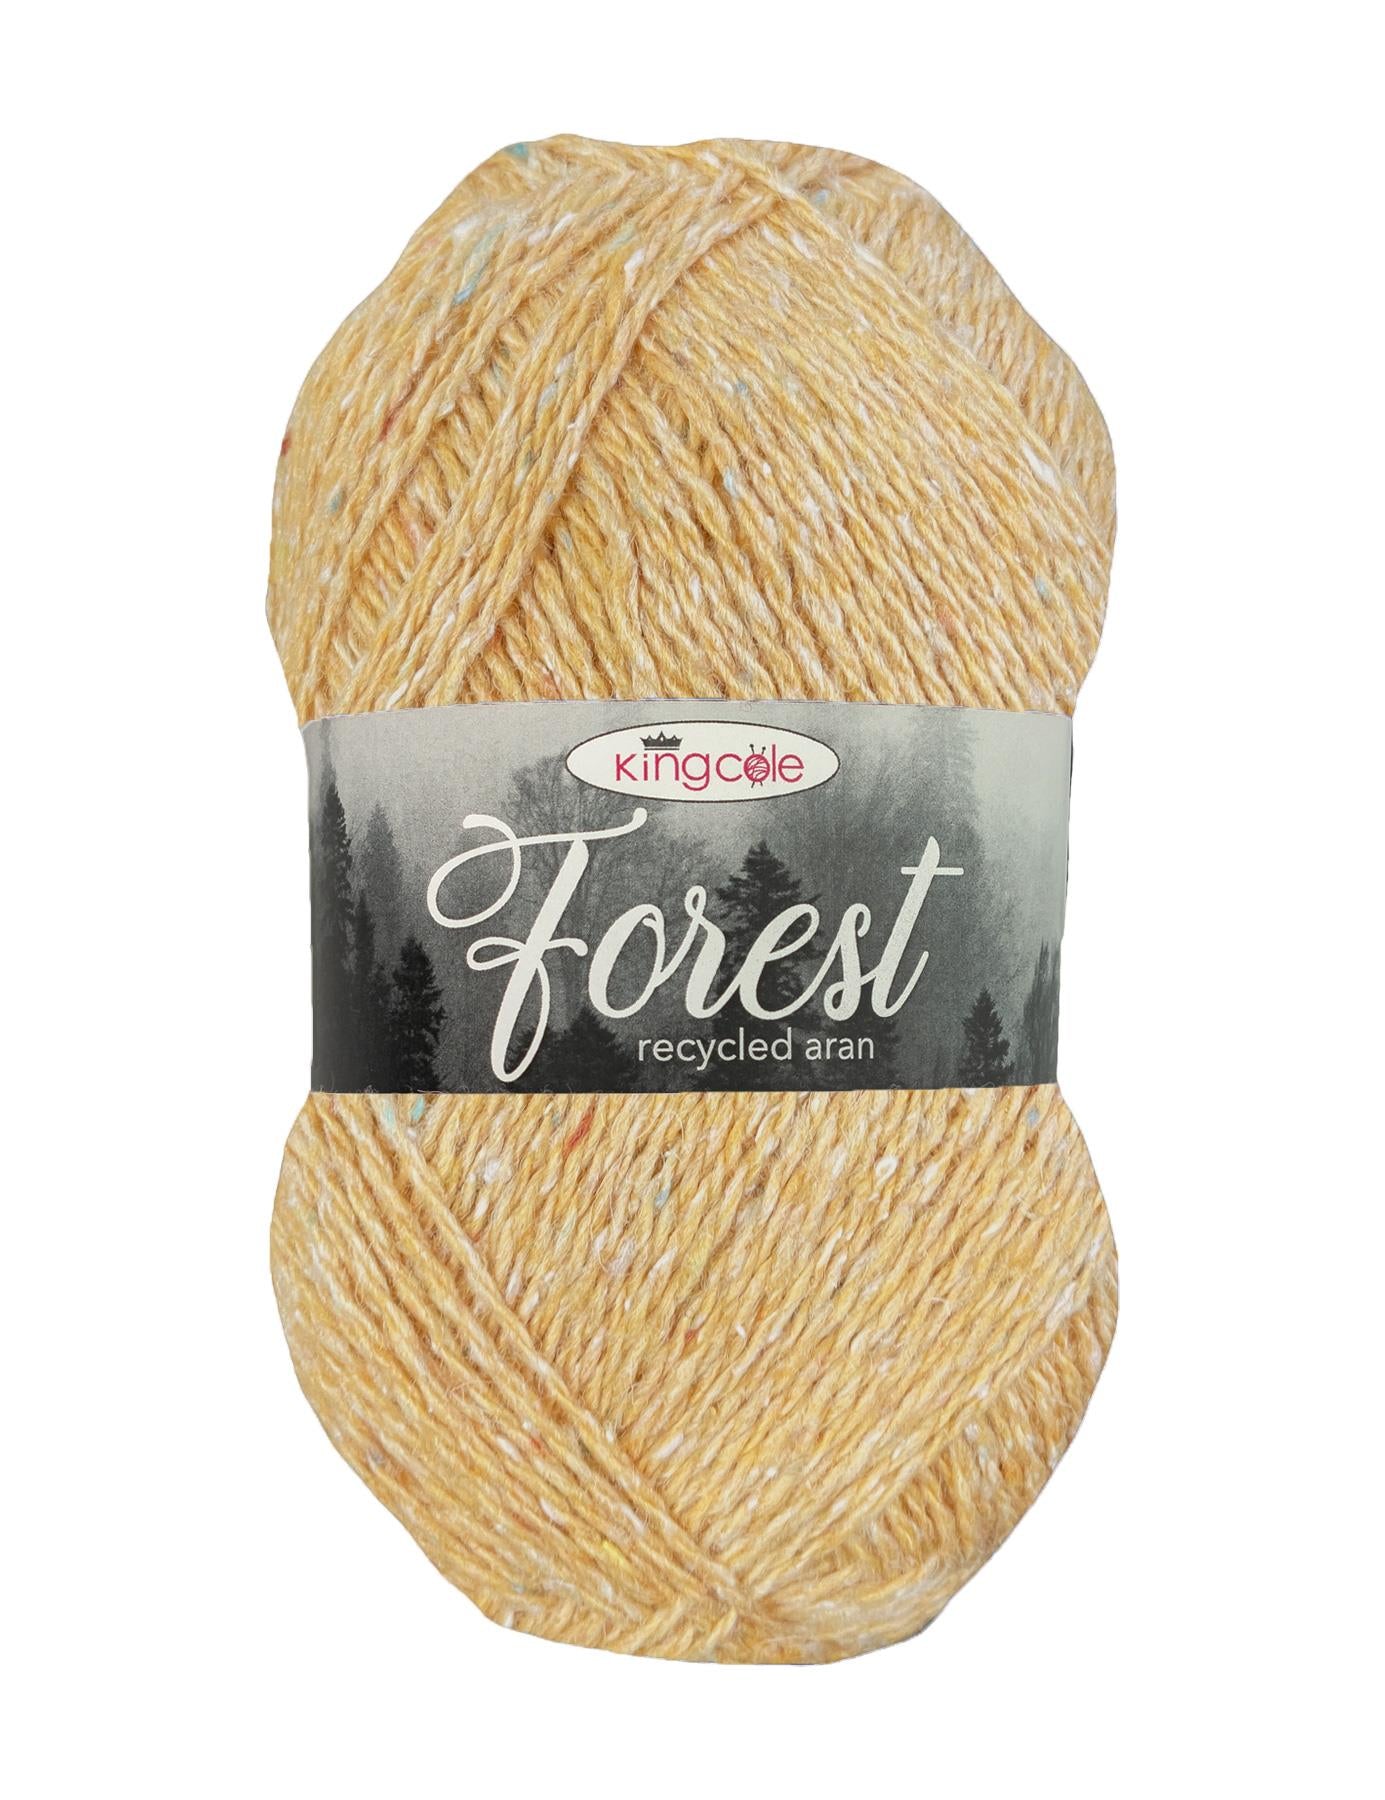 Avondale Forest (1920) 100% recycled aran yarn by King Cole (100g)